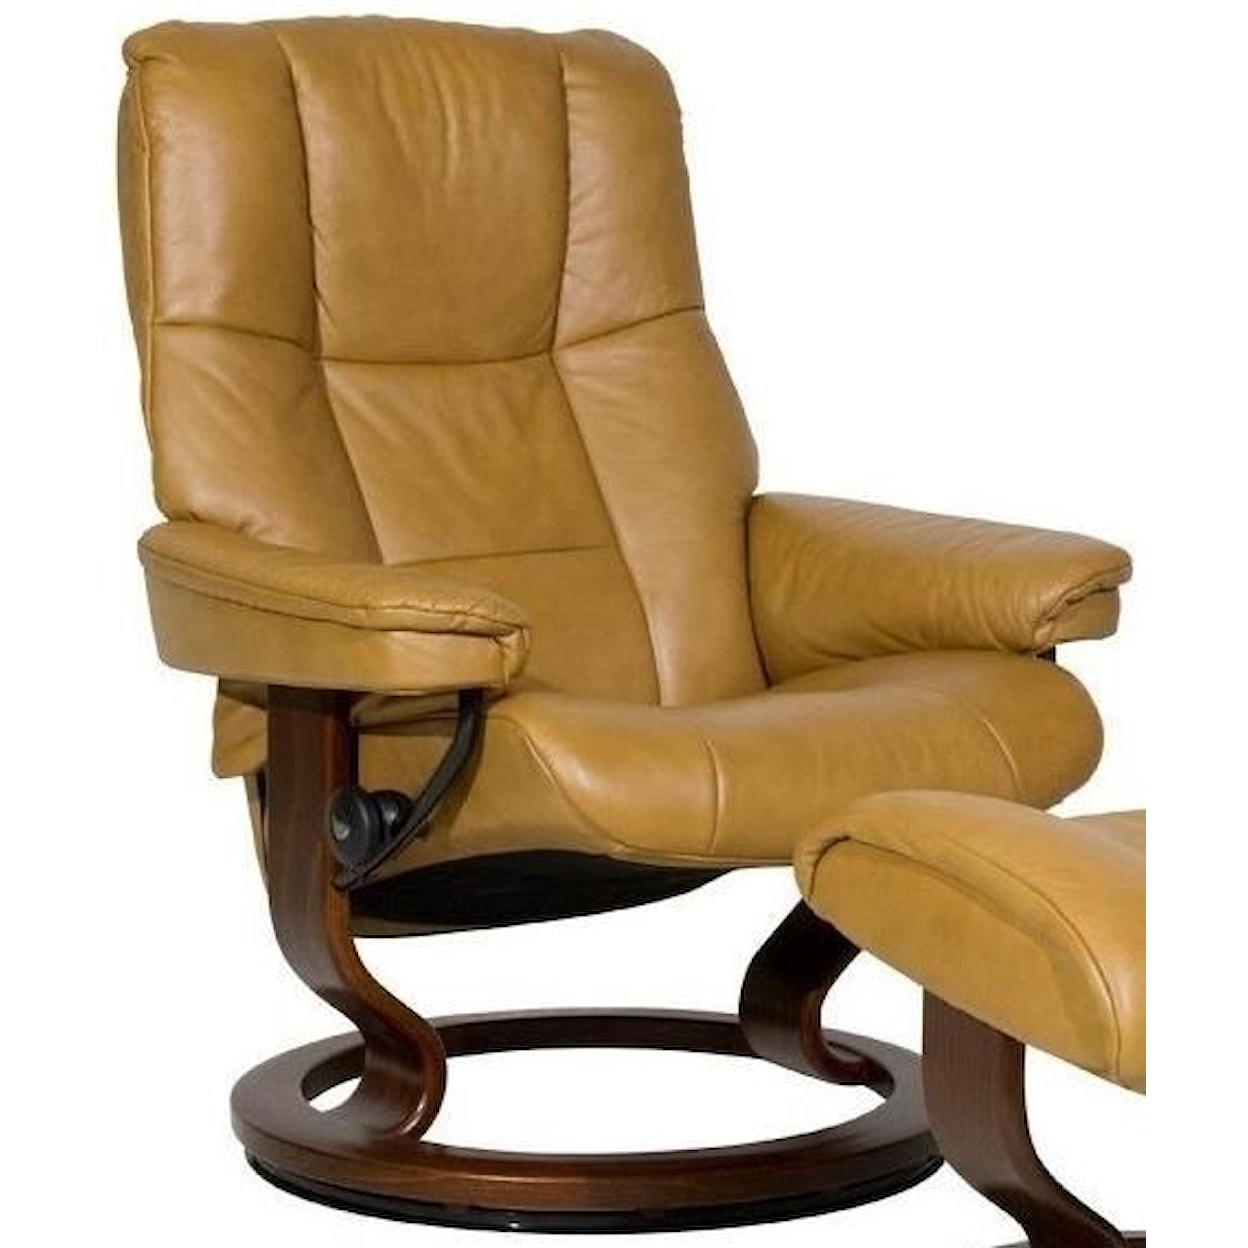 Stressless by Ekornes Mayfair Medium Reclining Chair with Classic Base